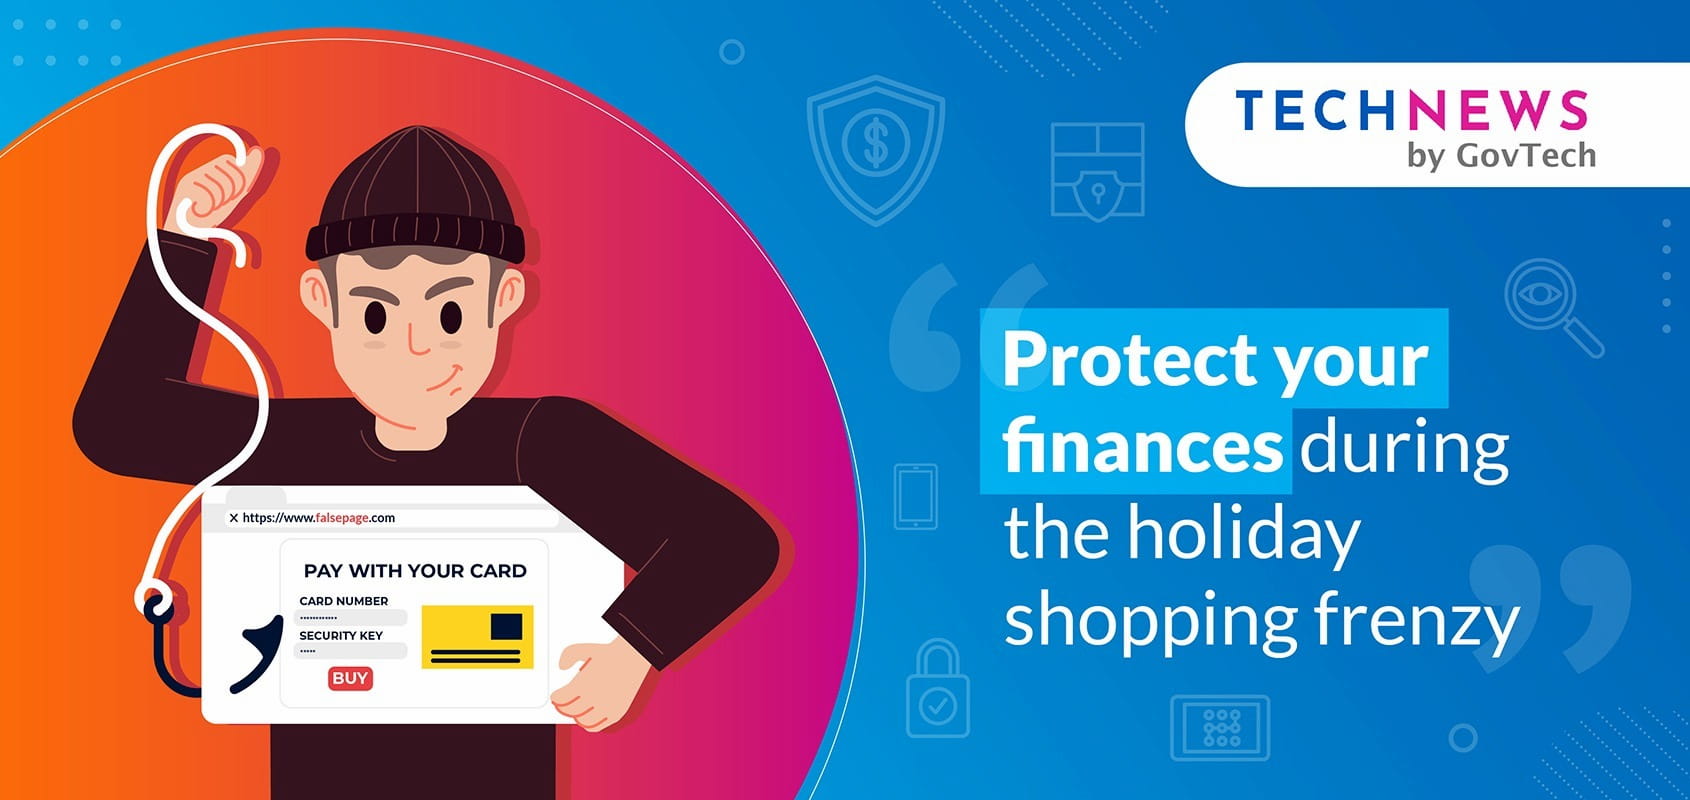 Avoid scams and safeguard your payment information when shopping online